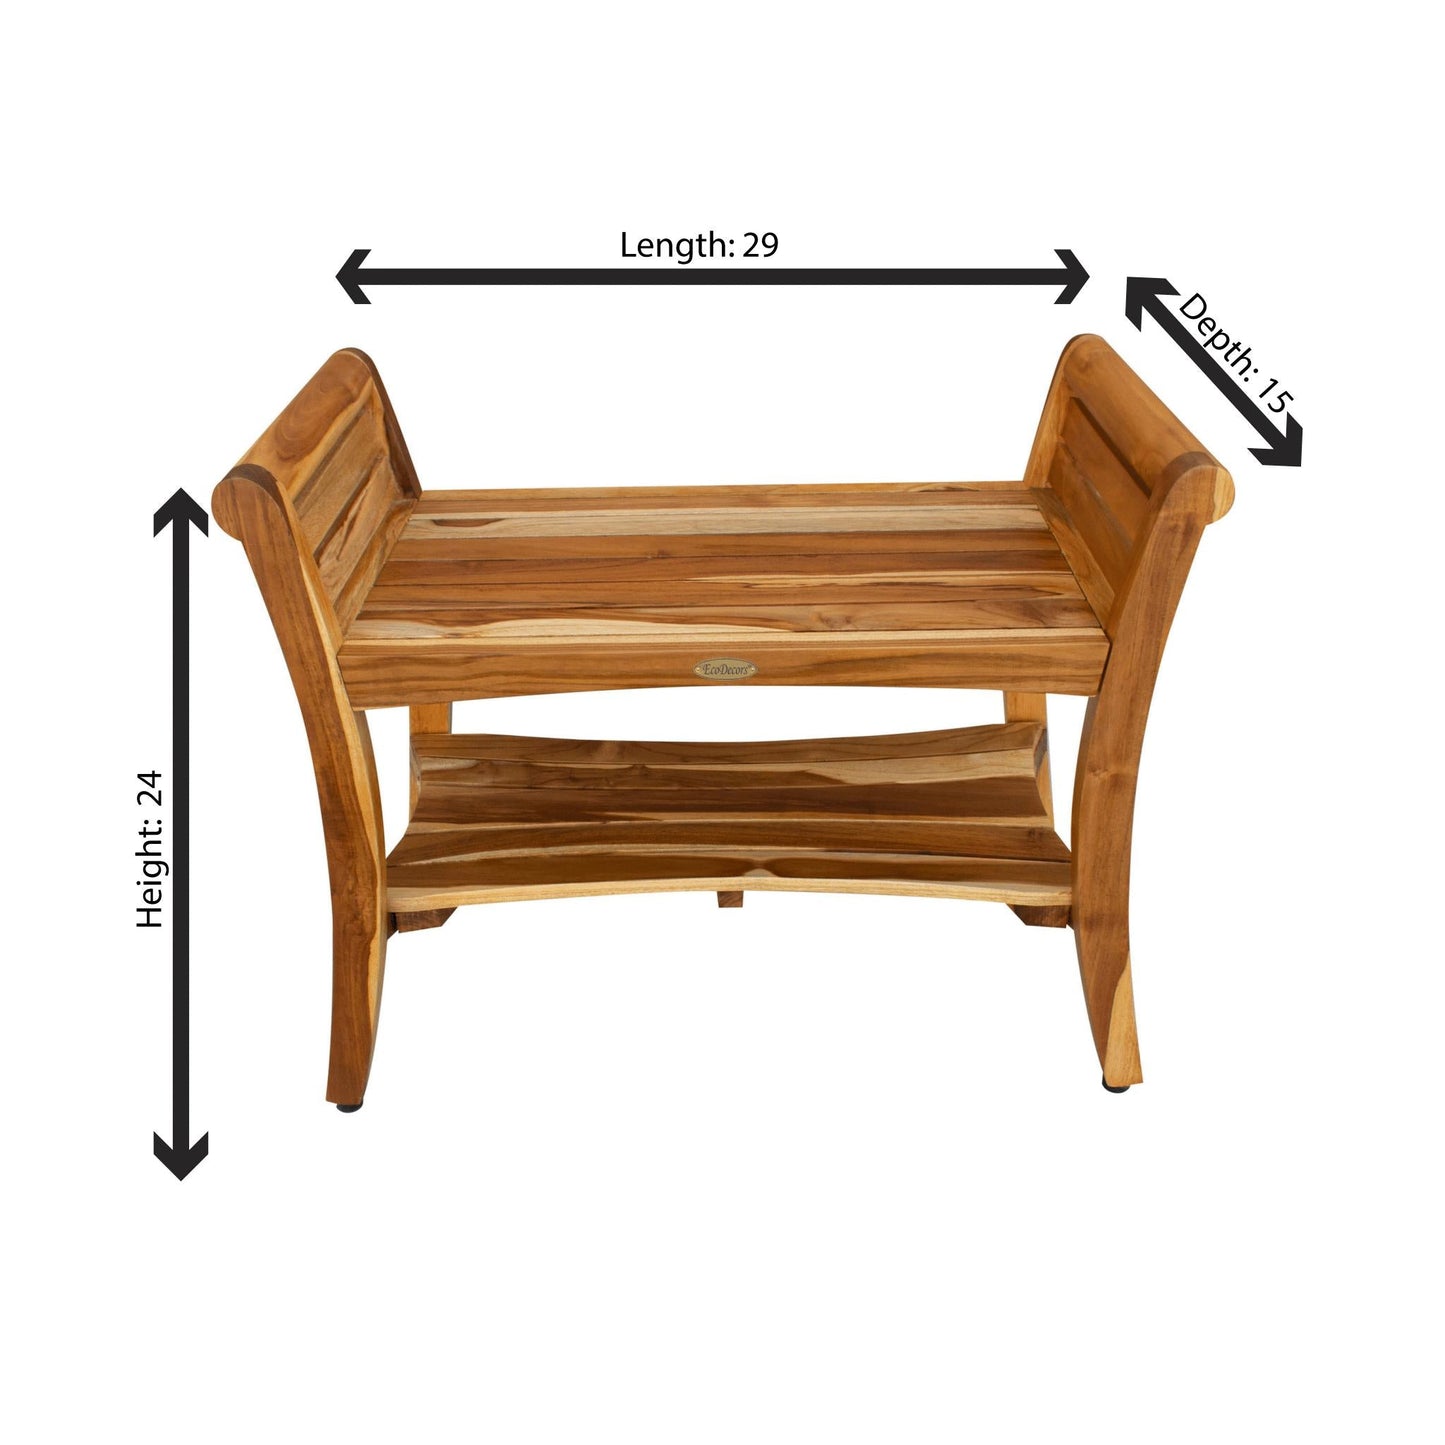 EcoDecors Symmetry 29" EarthyTeak Solid Teak Wood Shower Bench With Shelf and LiftAide Arms